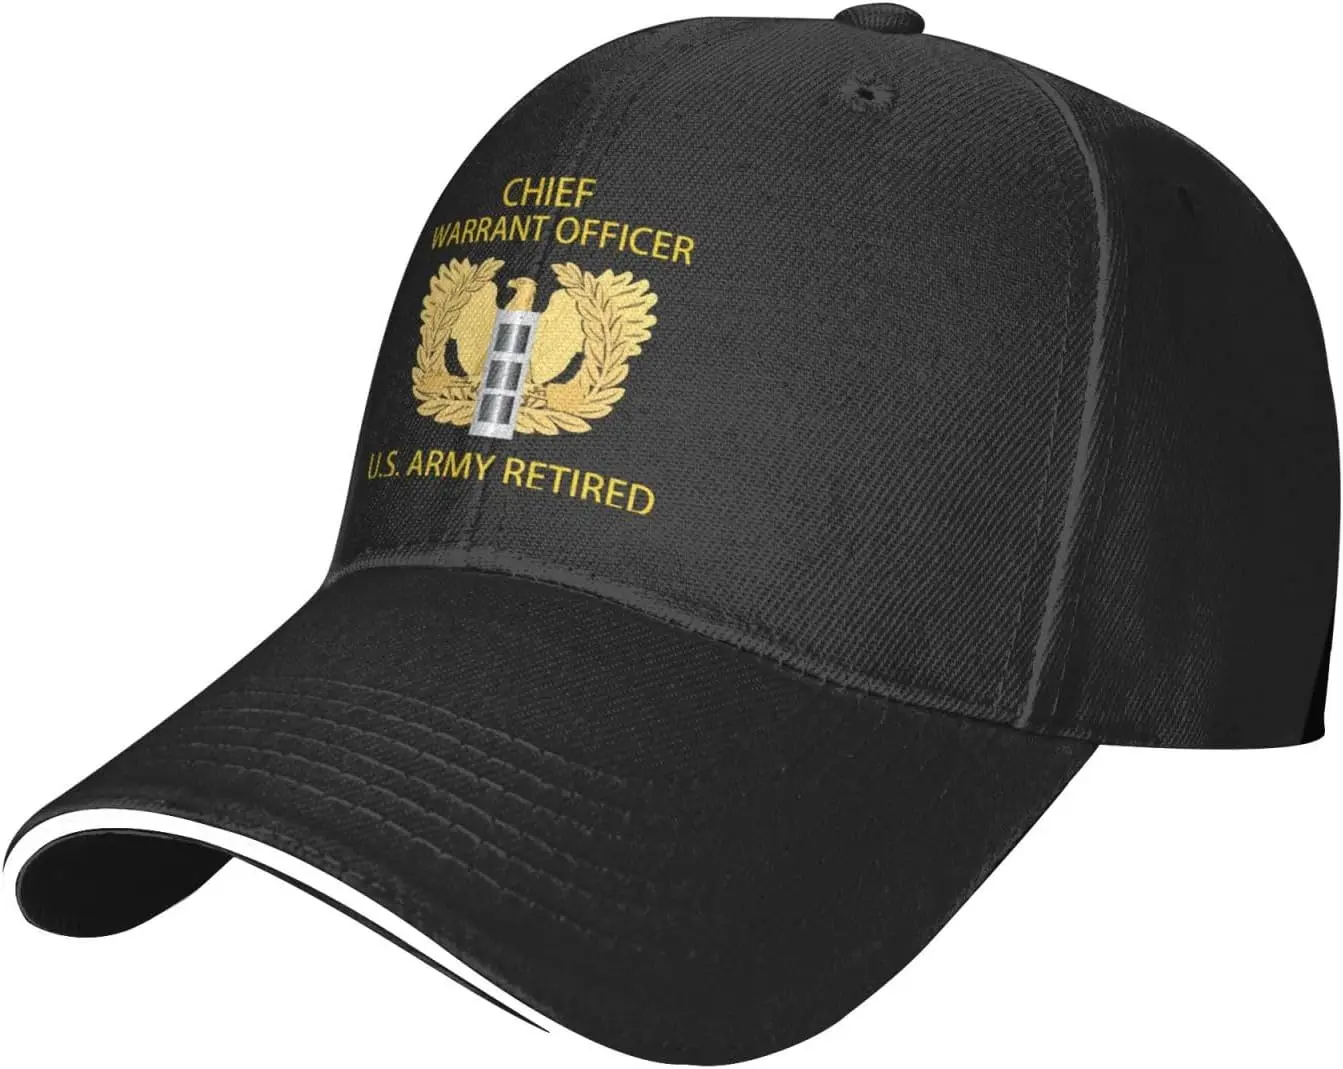 

Us Army Retired Chief Warrant Officer Emblem Cw3 Premium Adjustable Baseball Cap for Men and Women - Outdoor Sports